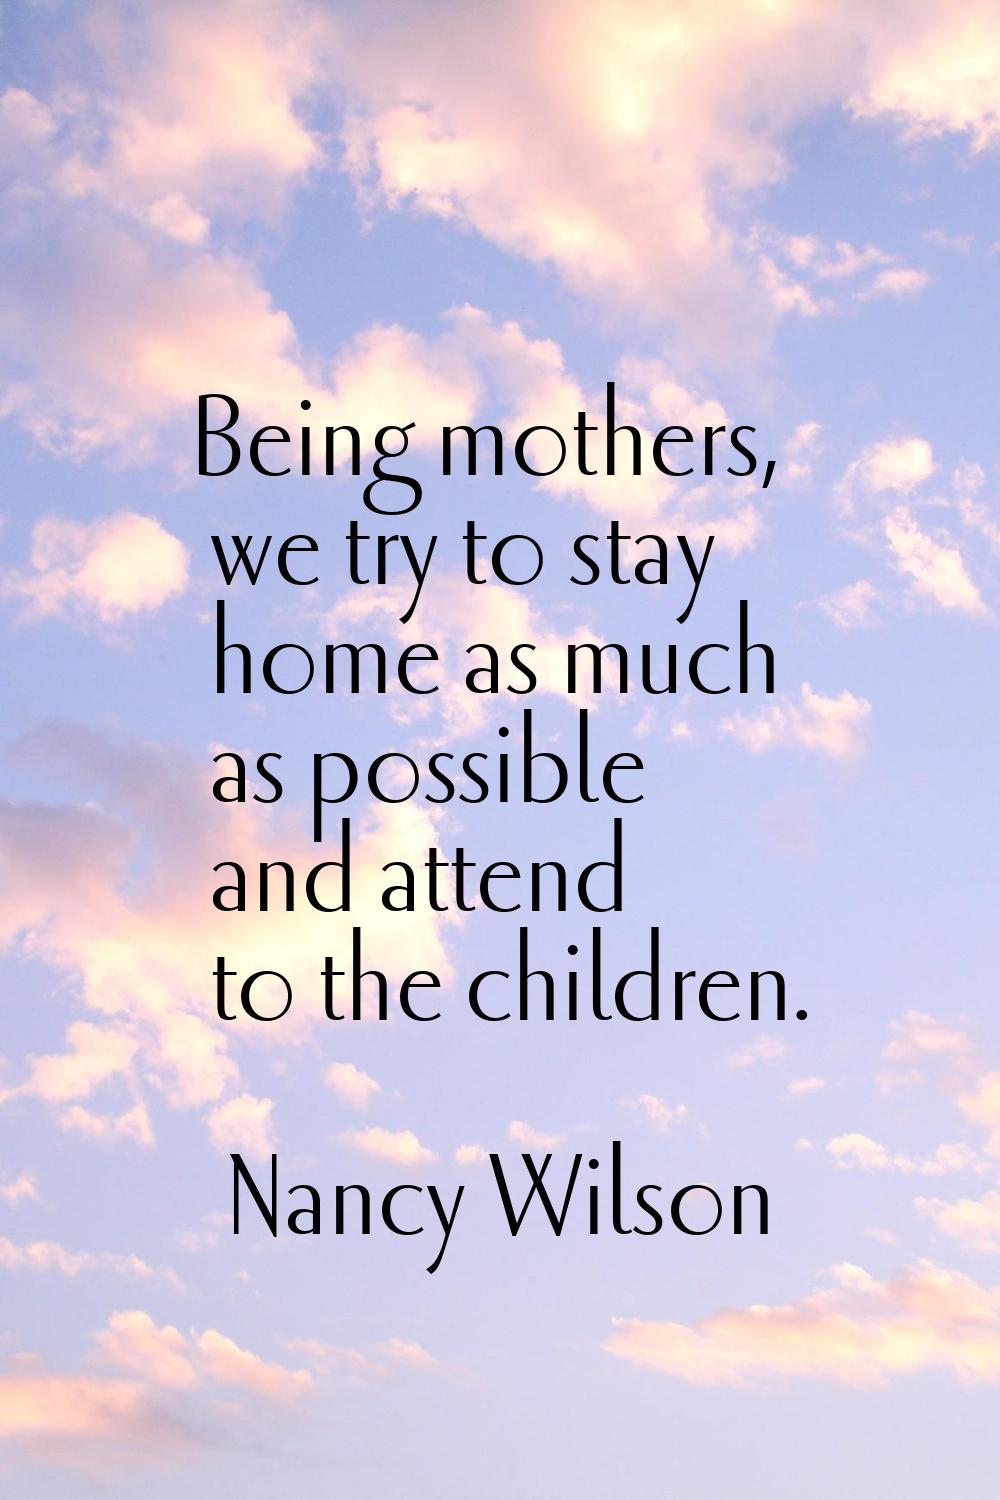 Being mothers, we try to stay home as much as possible and attend to the children.